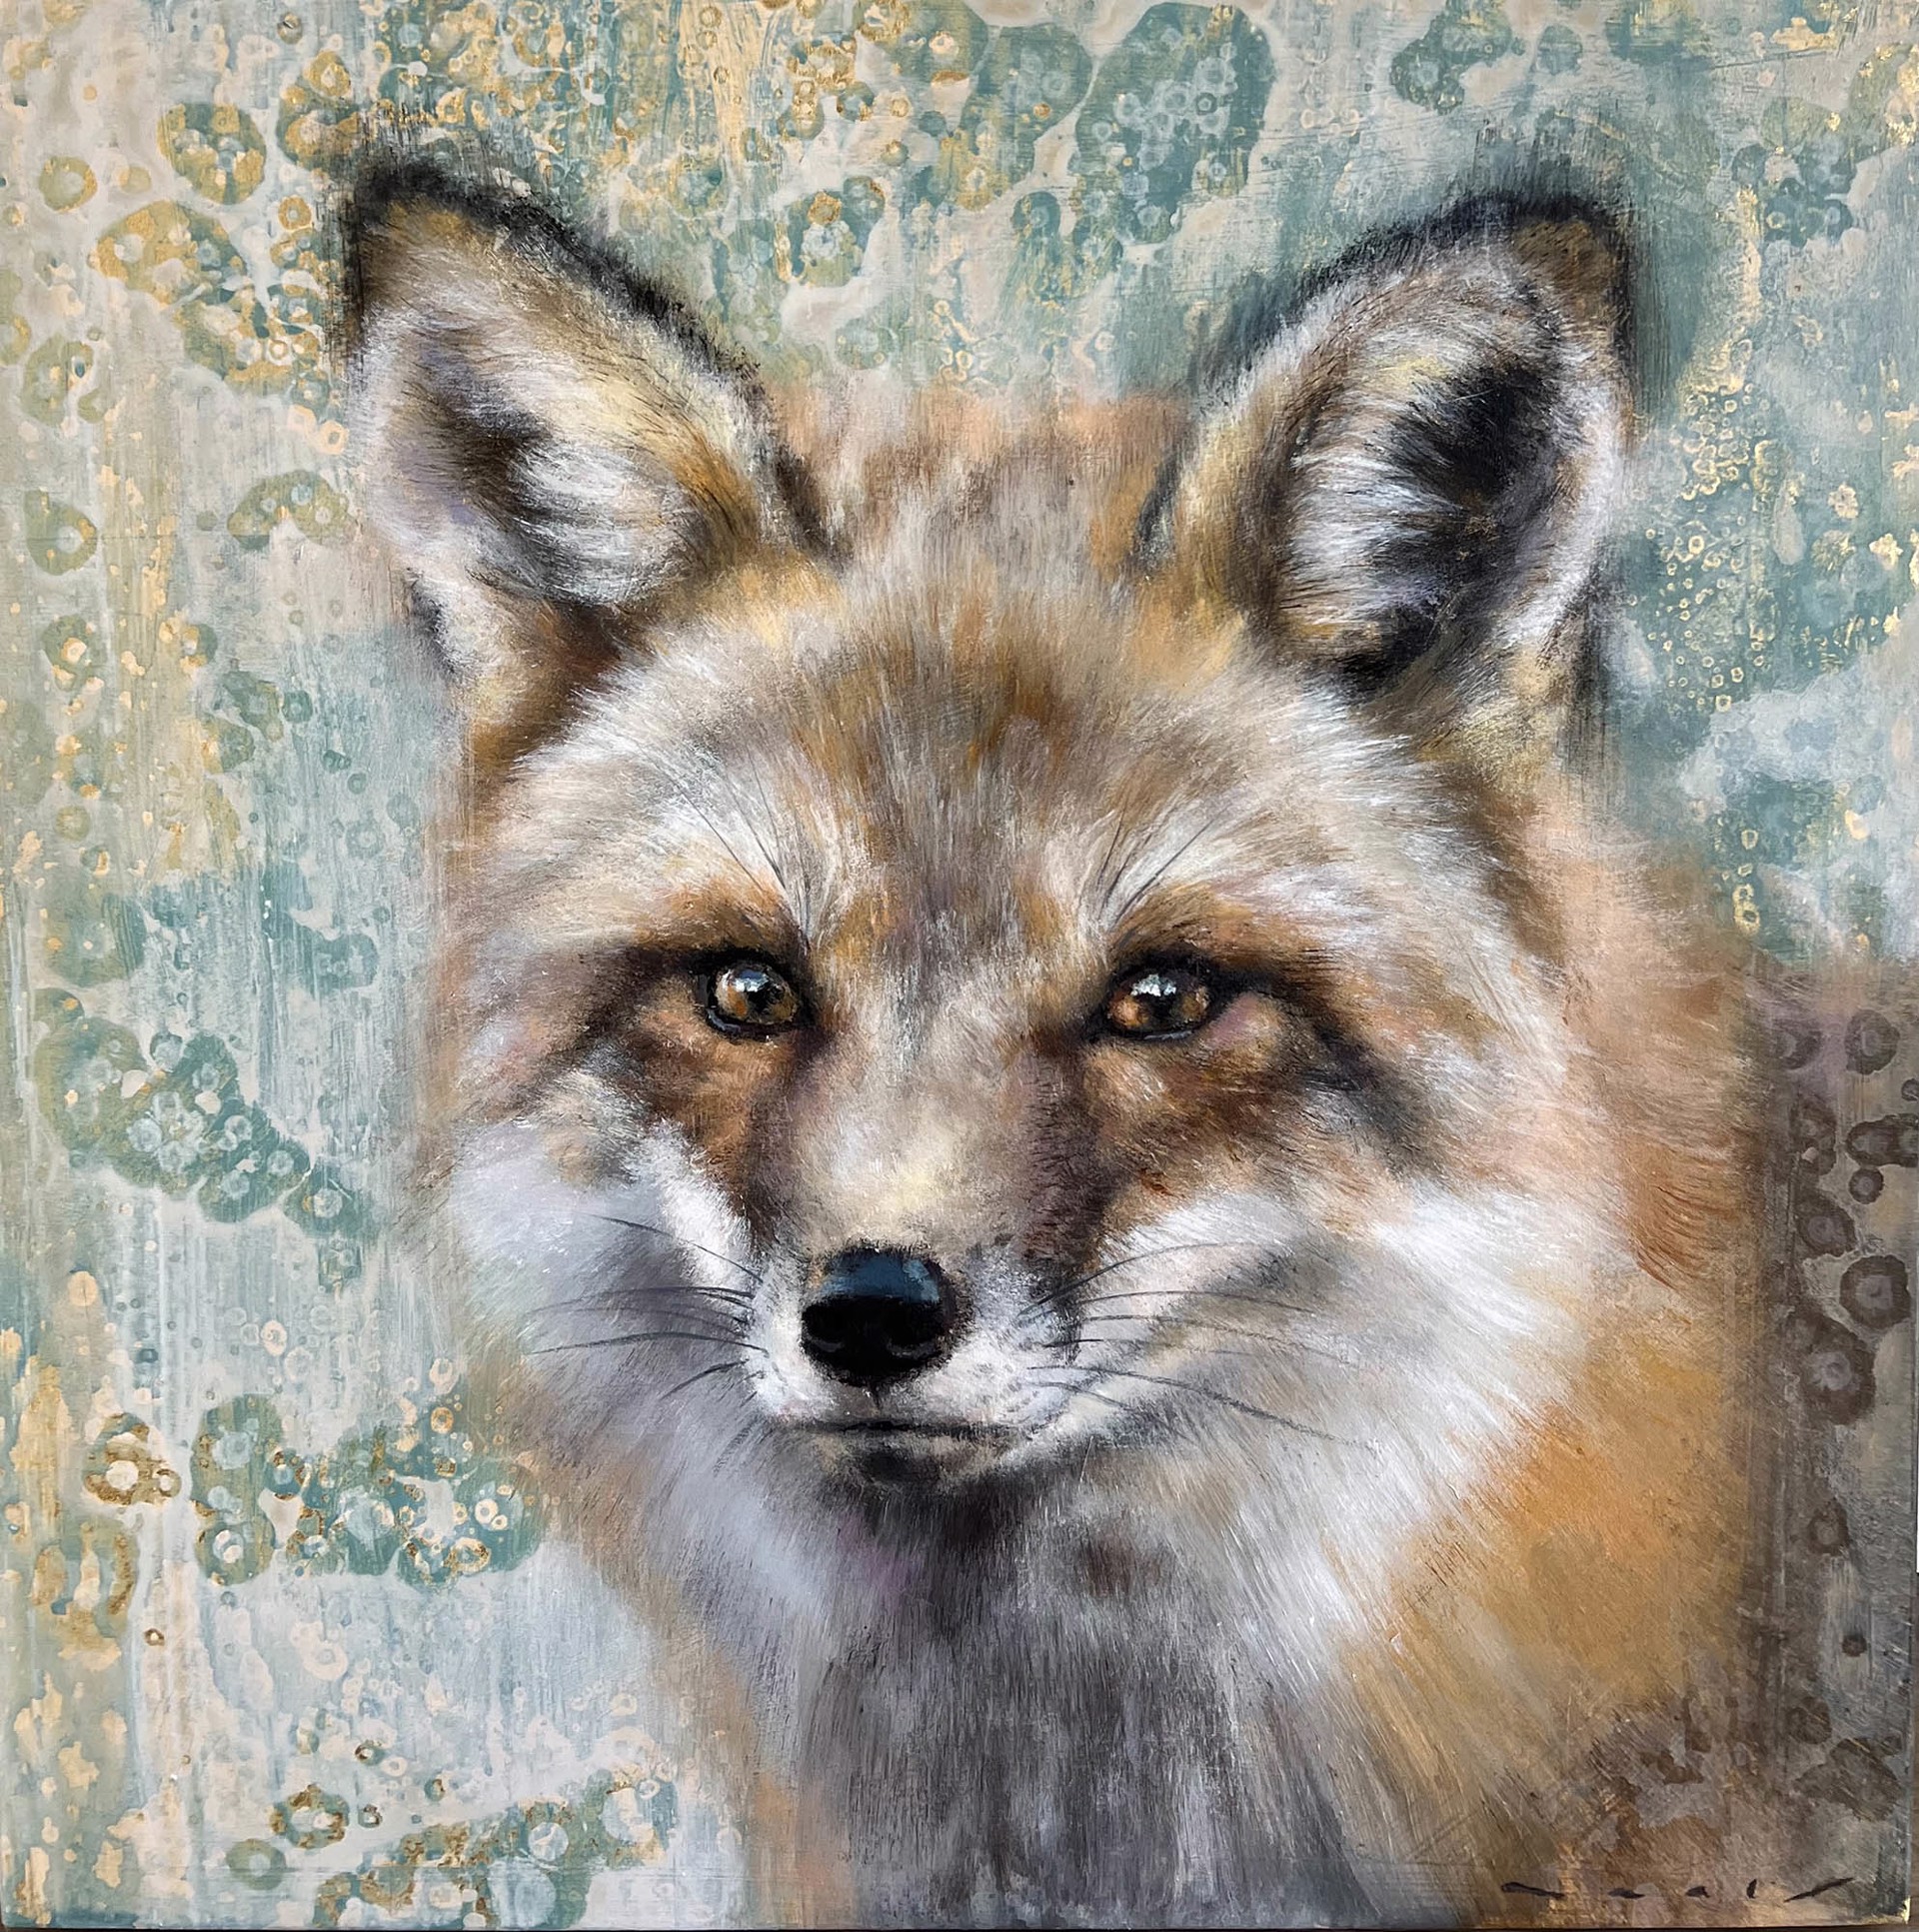 Original Mixed Media on Panel Featuring a Fox on a Blue Background